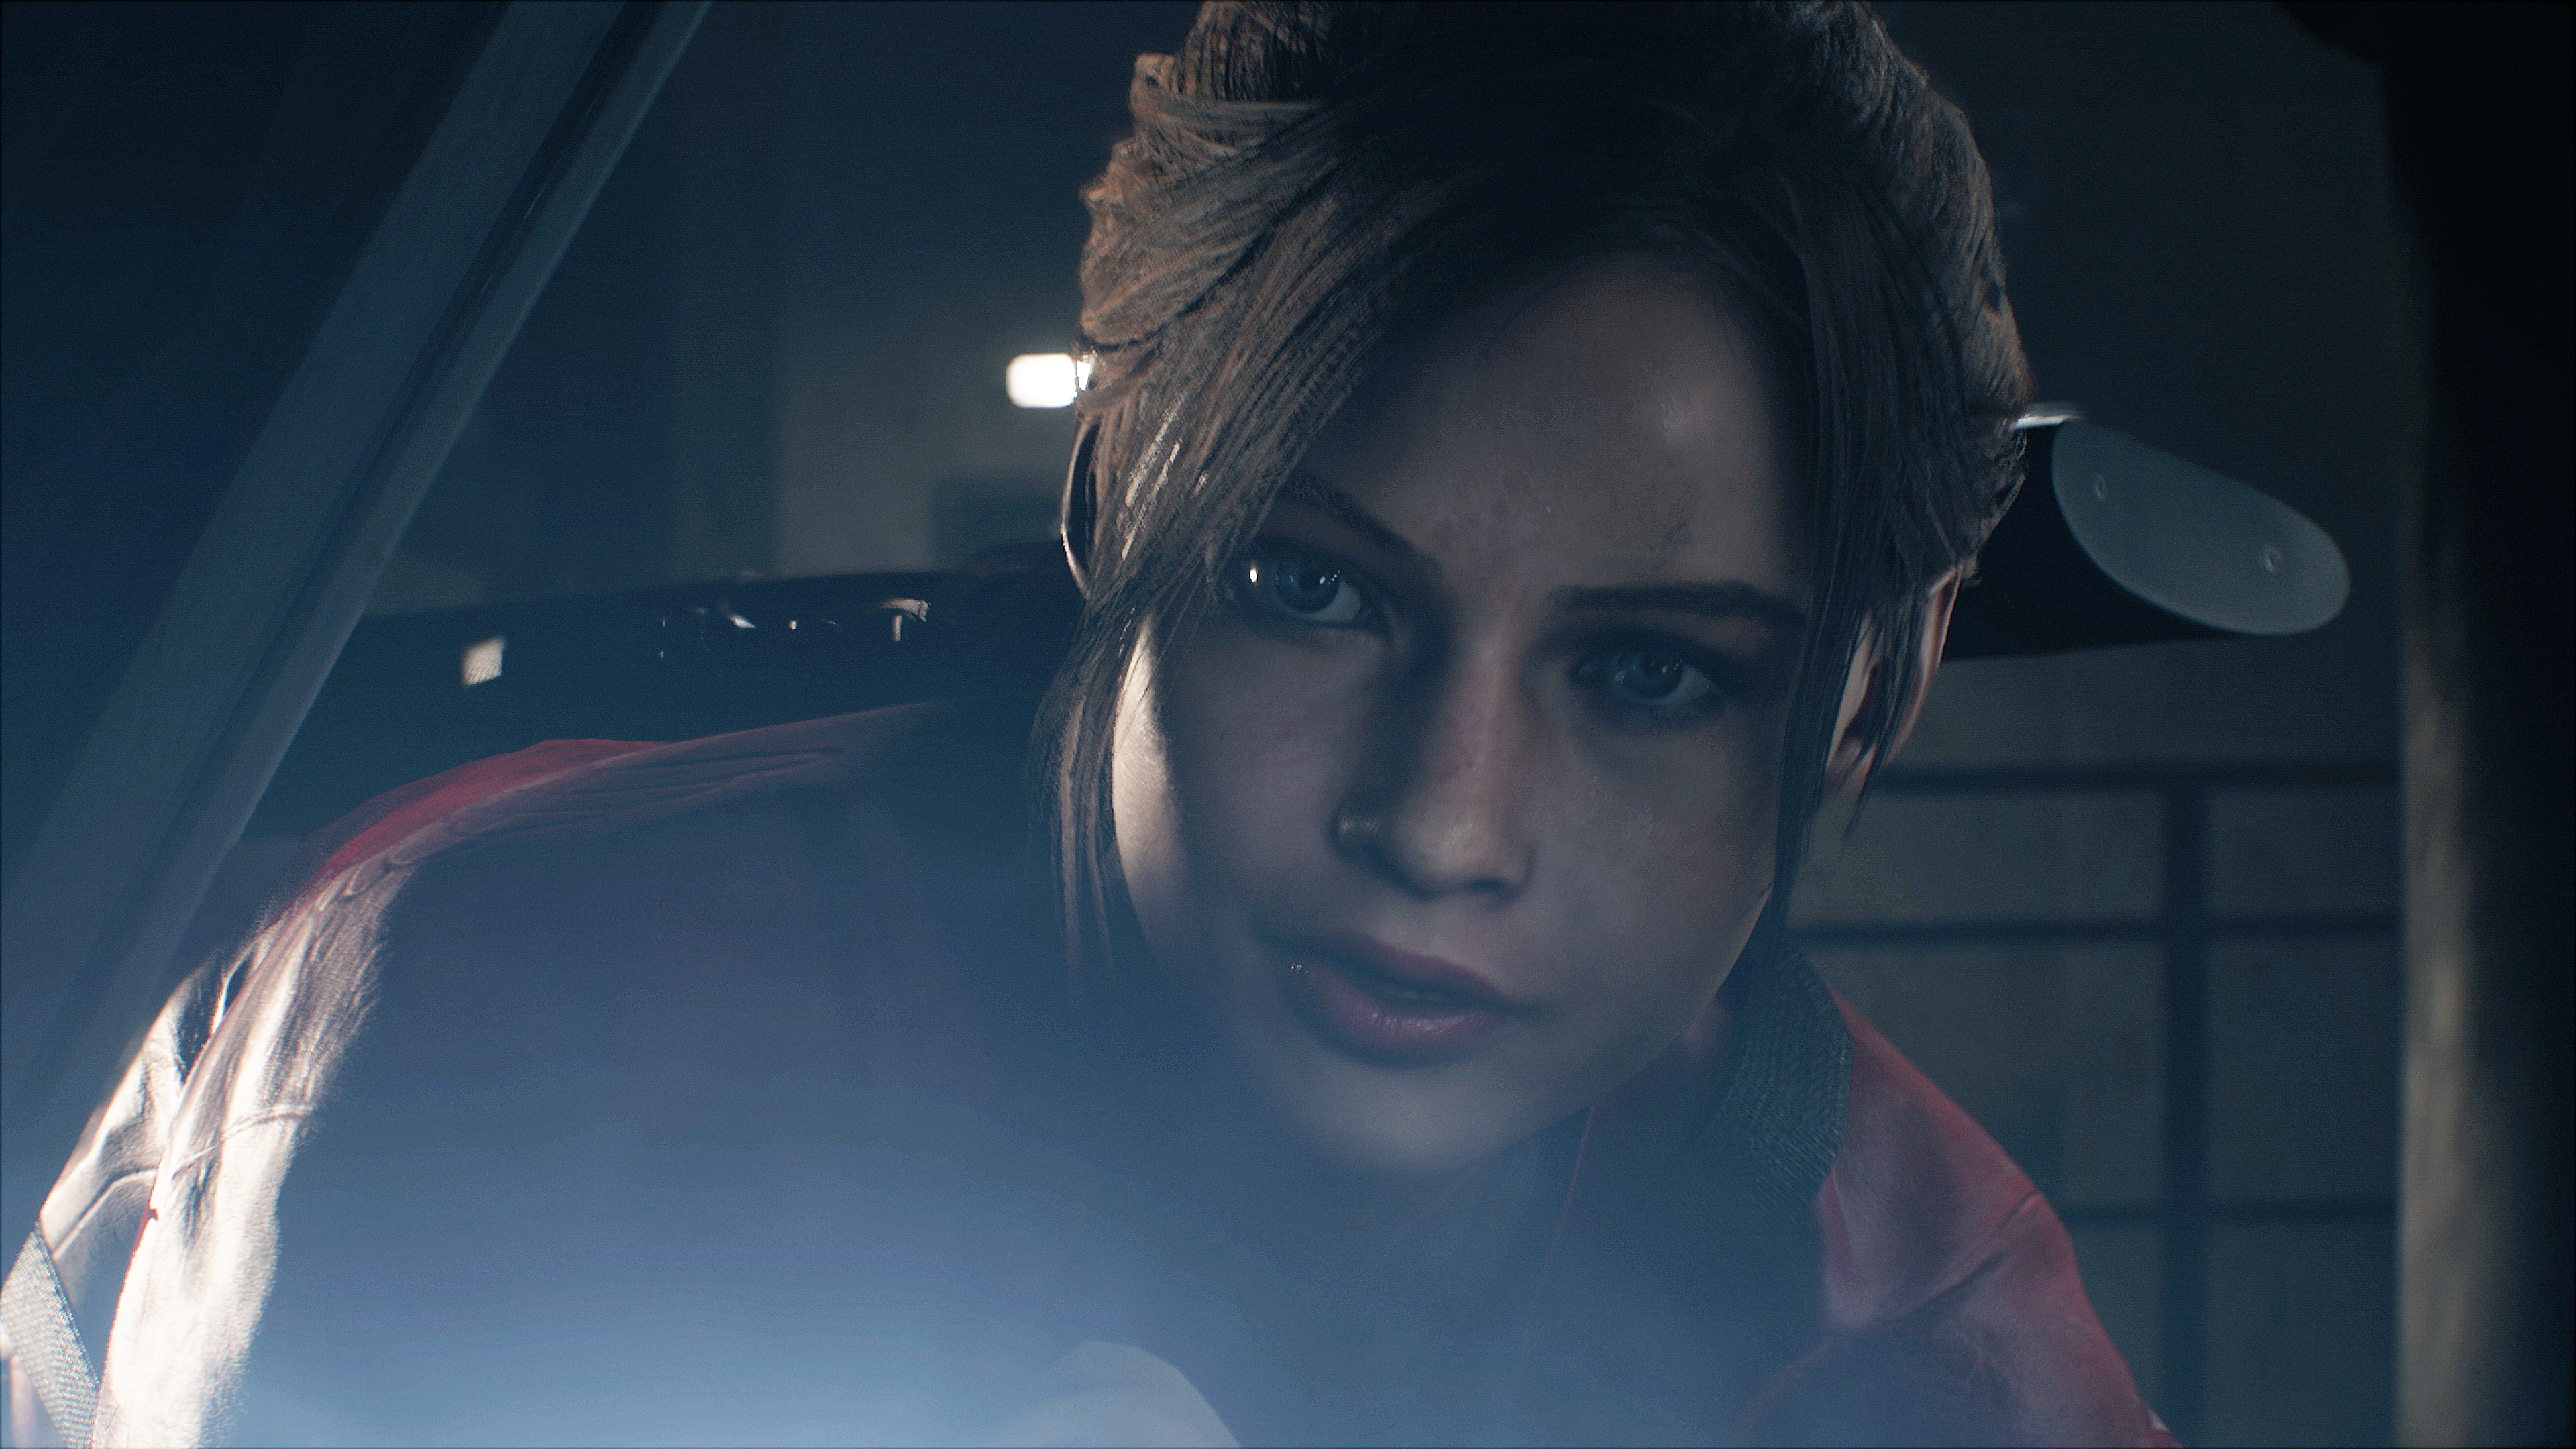 Resident Evil 2 (2019) Claire Redfield Close up 4k Ultra HD Wallpaper